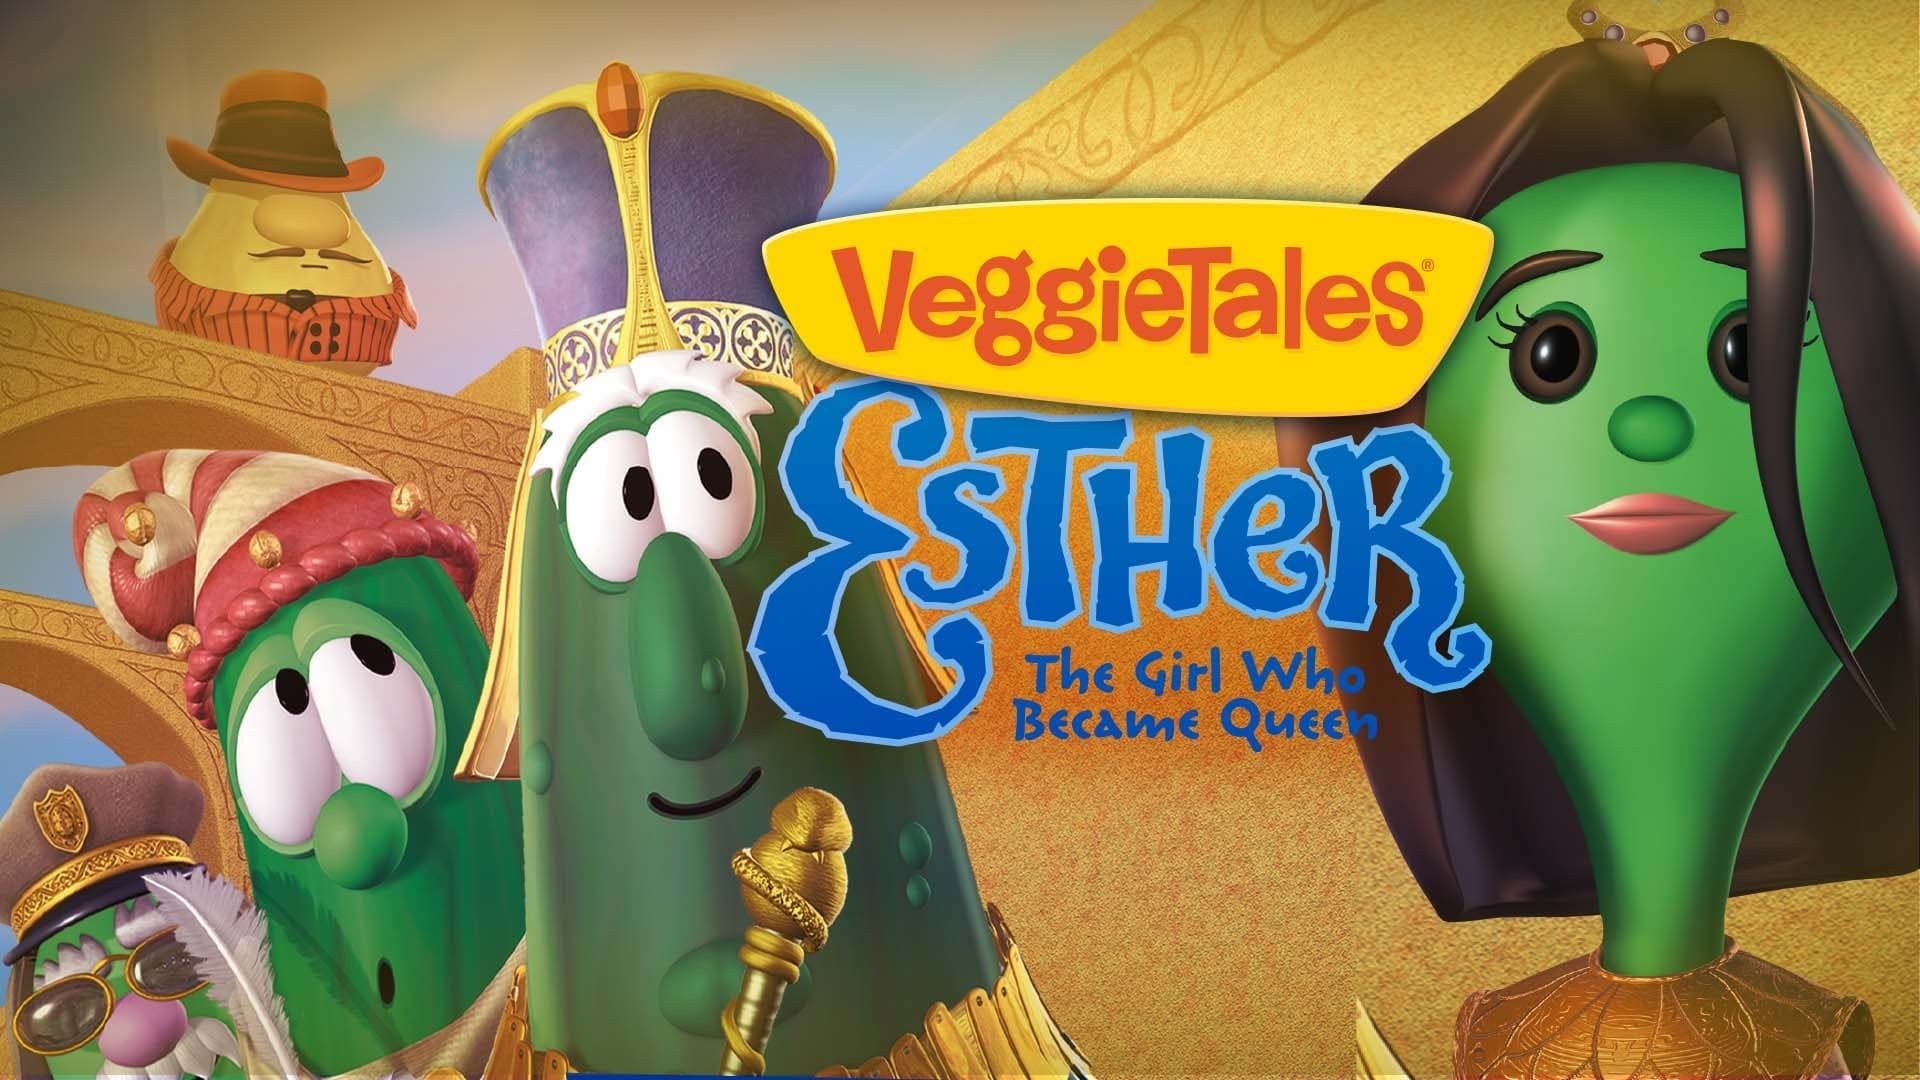 VeggieTales: Esther, the Girl Who Became Queen background